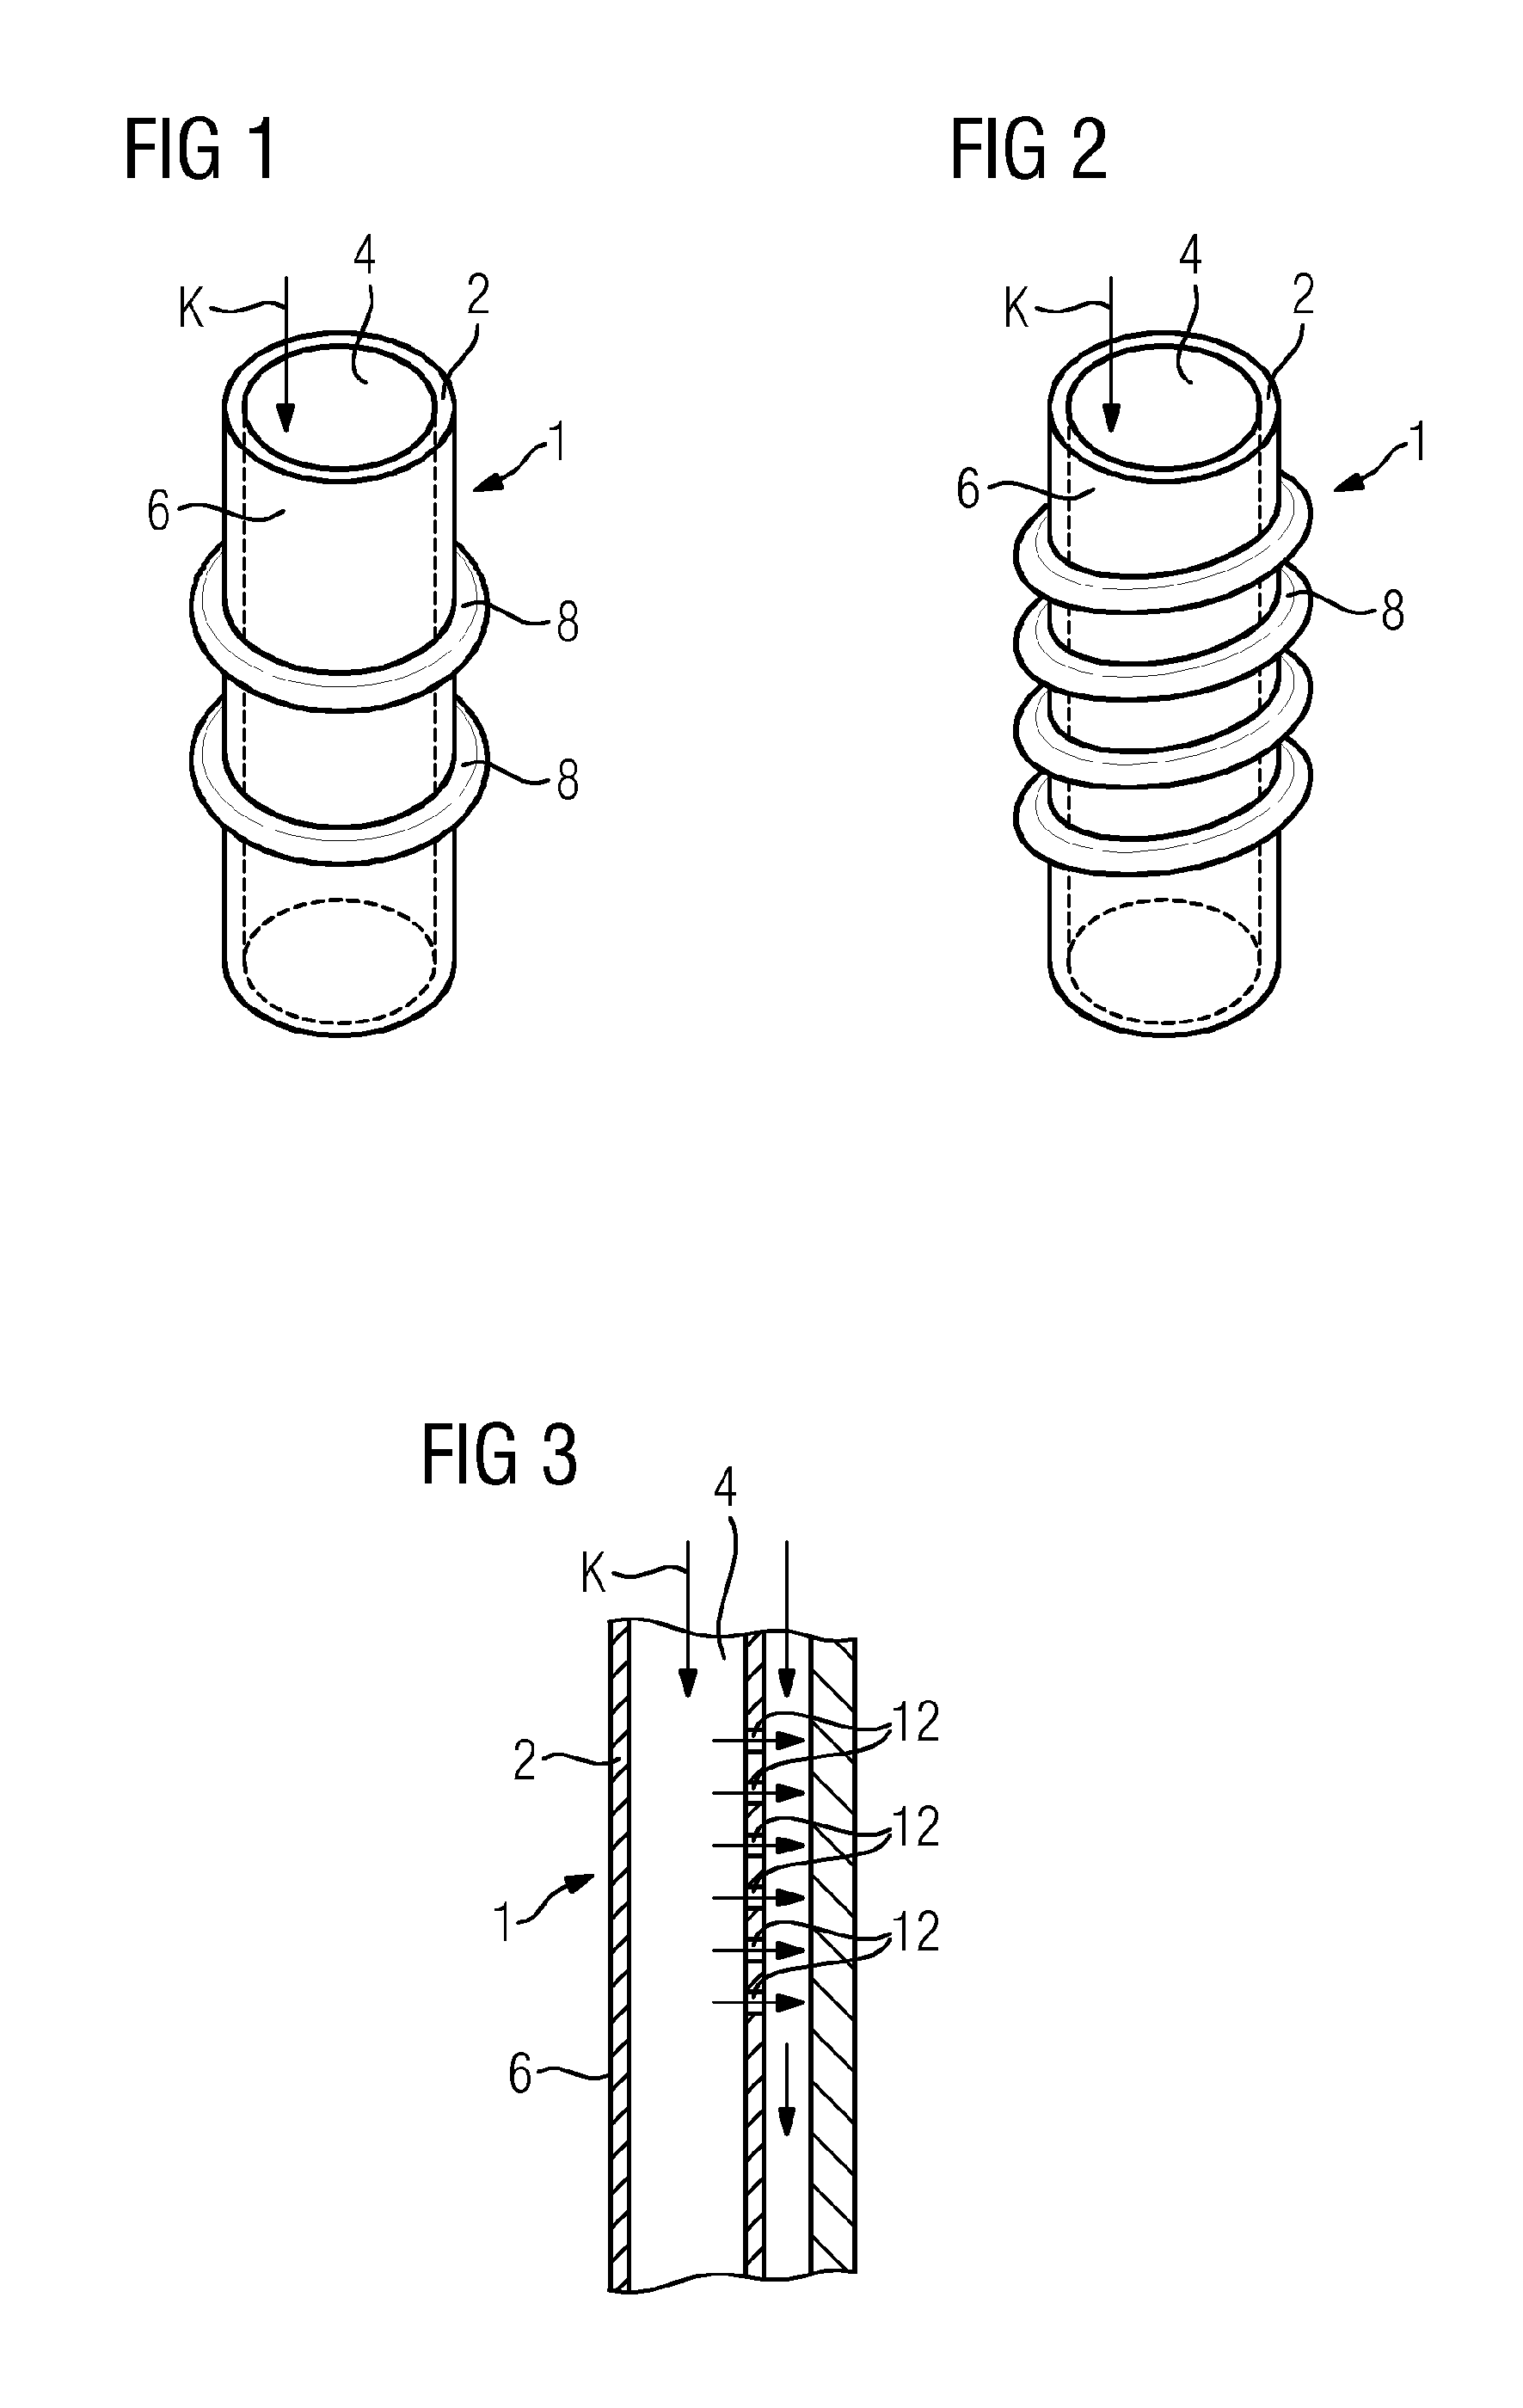 Coolant bridging line for a gas turbine, which coolant bridging line can be inserted into a hollow, cooled turbine blade